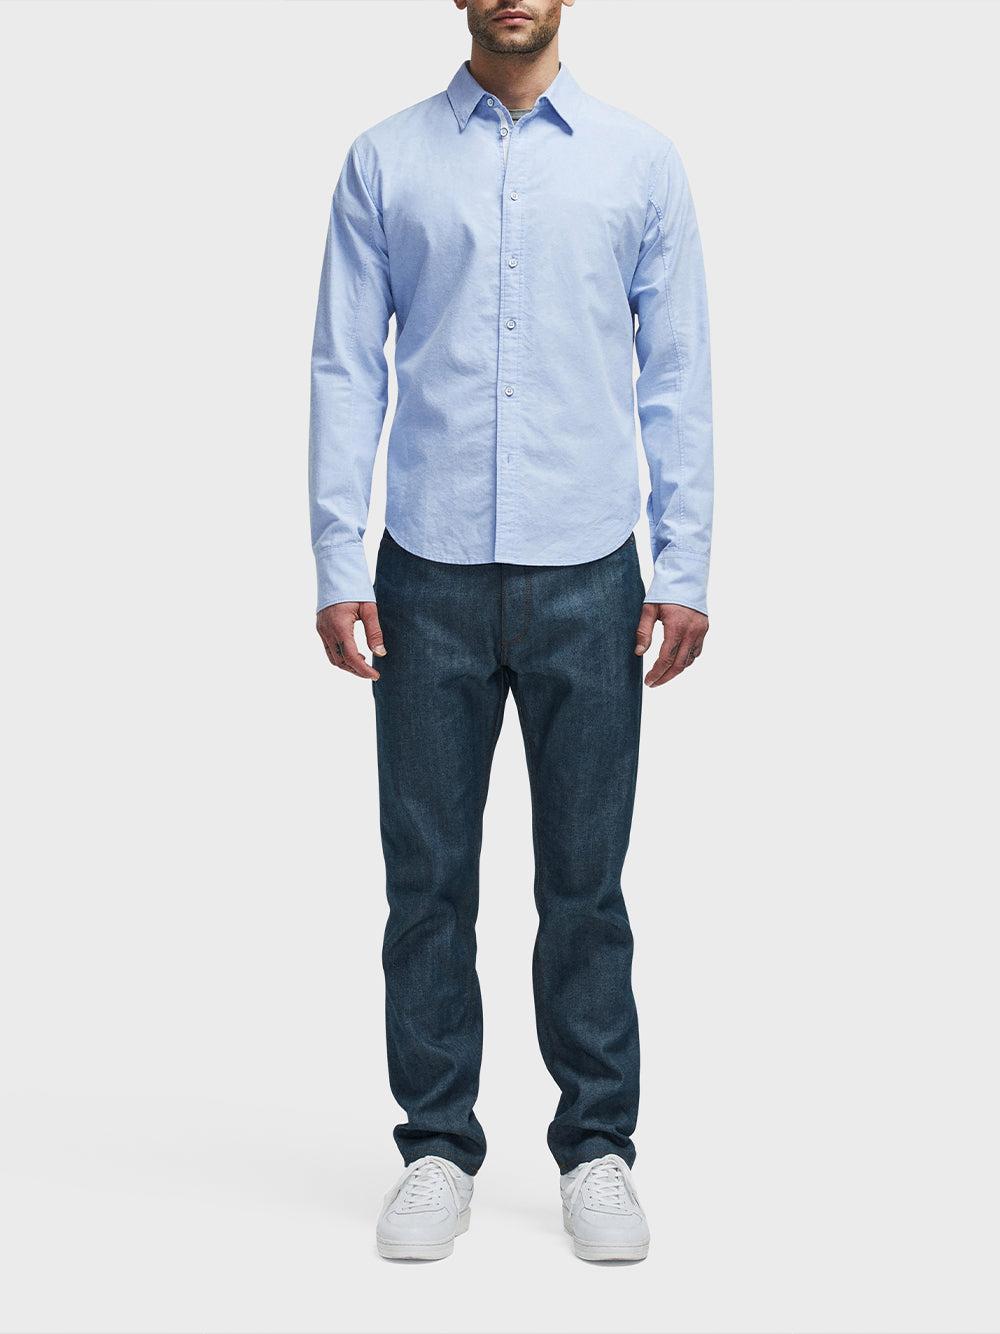 Fit 2 Engineered Cotton Oxford Shirt (Oxford Blue)